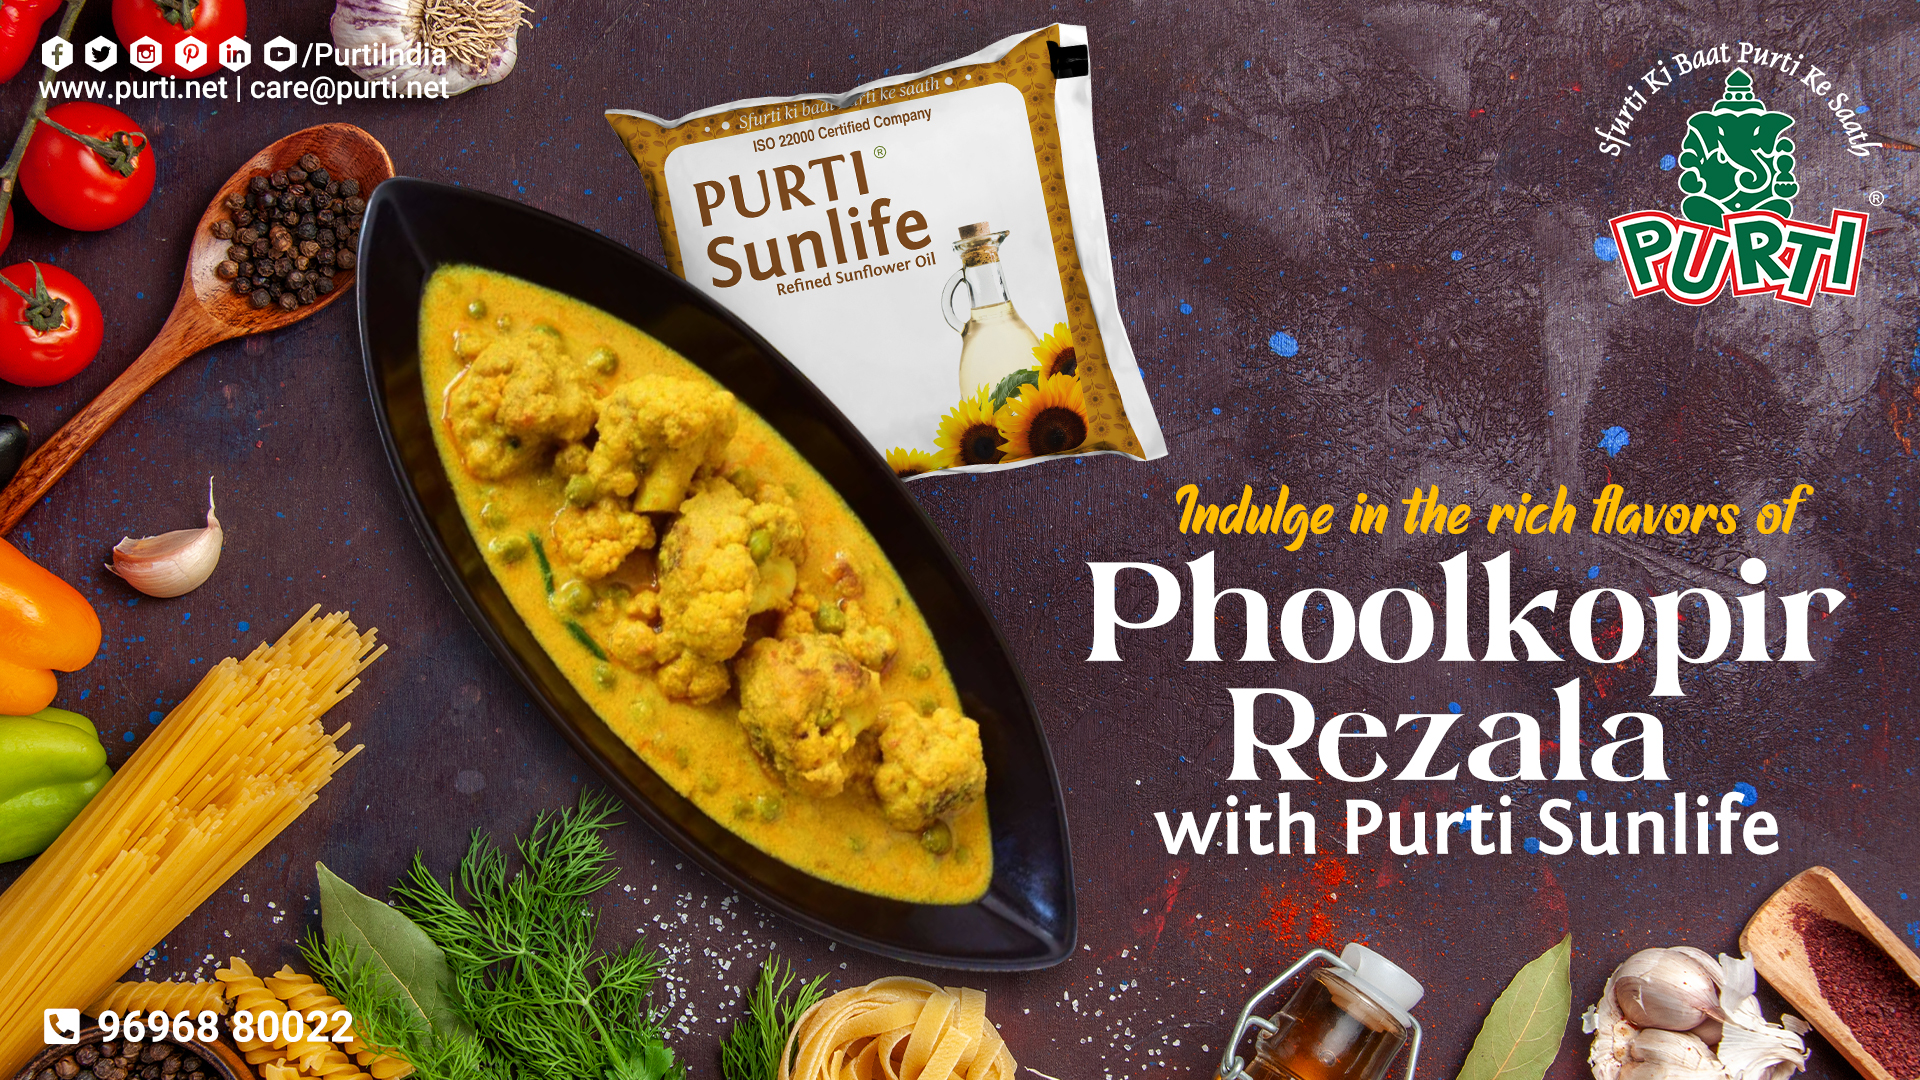 Indulge in the rich flavors of Phoolkopir Rezala with Purti Sunlife Refined Sunflower Oil